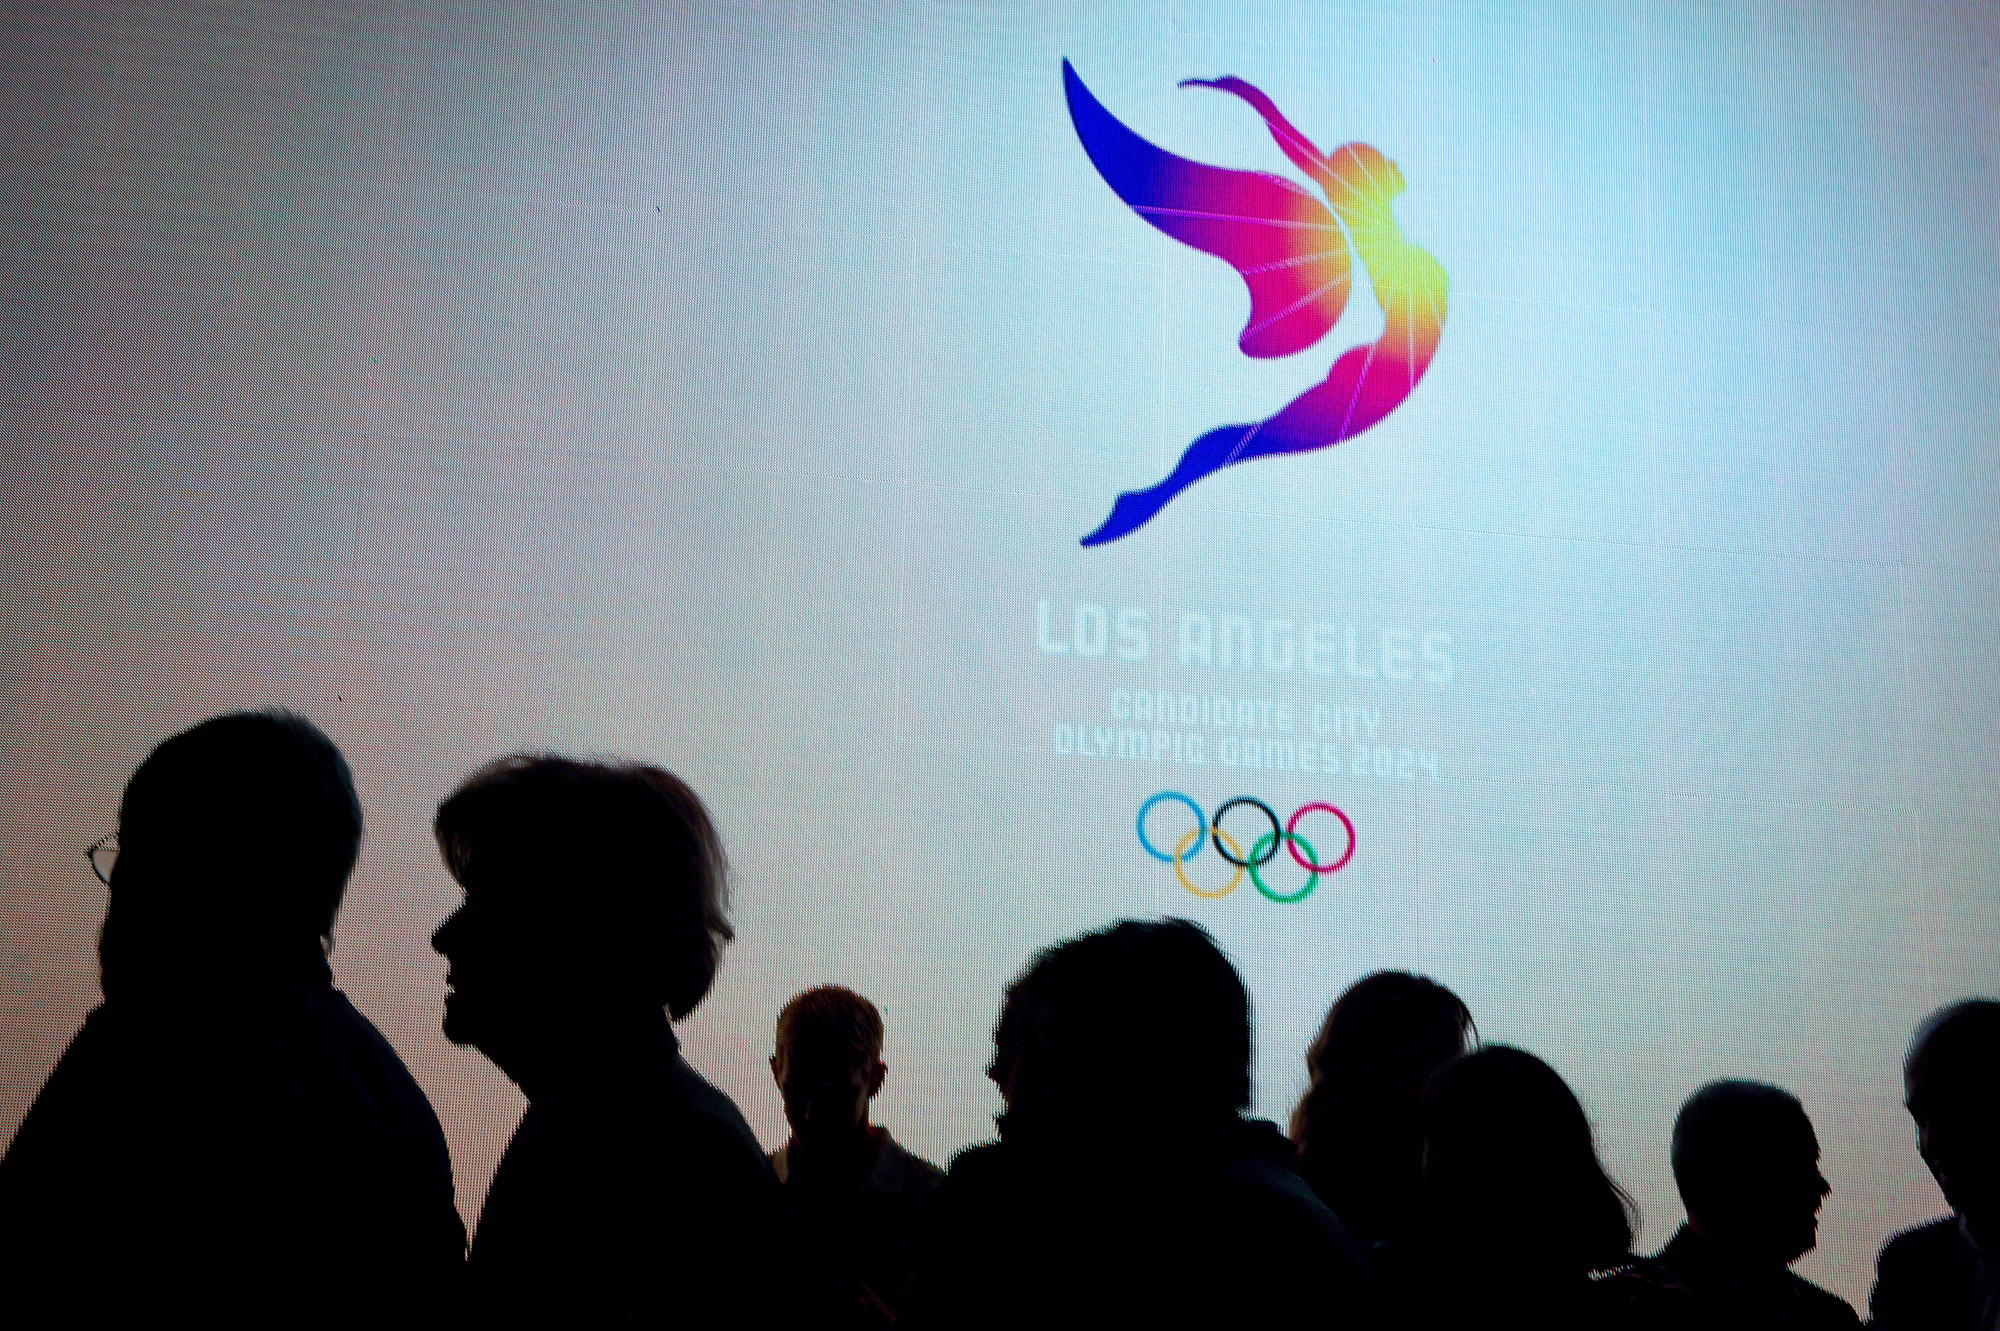 The Los Angeles candidate city logo for the 2024 Olympic Games is unveiled in Los Angeles on Tuesday night, Feb. 16, 2016. (Sarah Reingewirtz/Pasadena Star-News via AP)